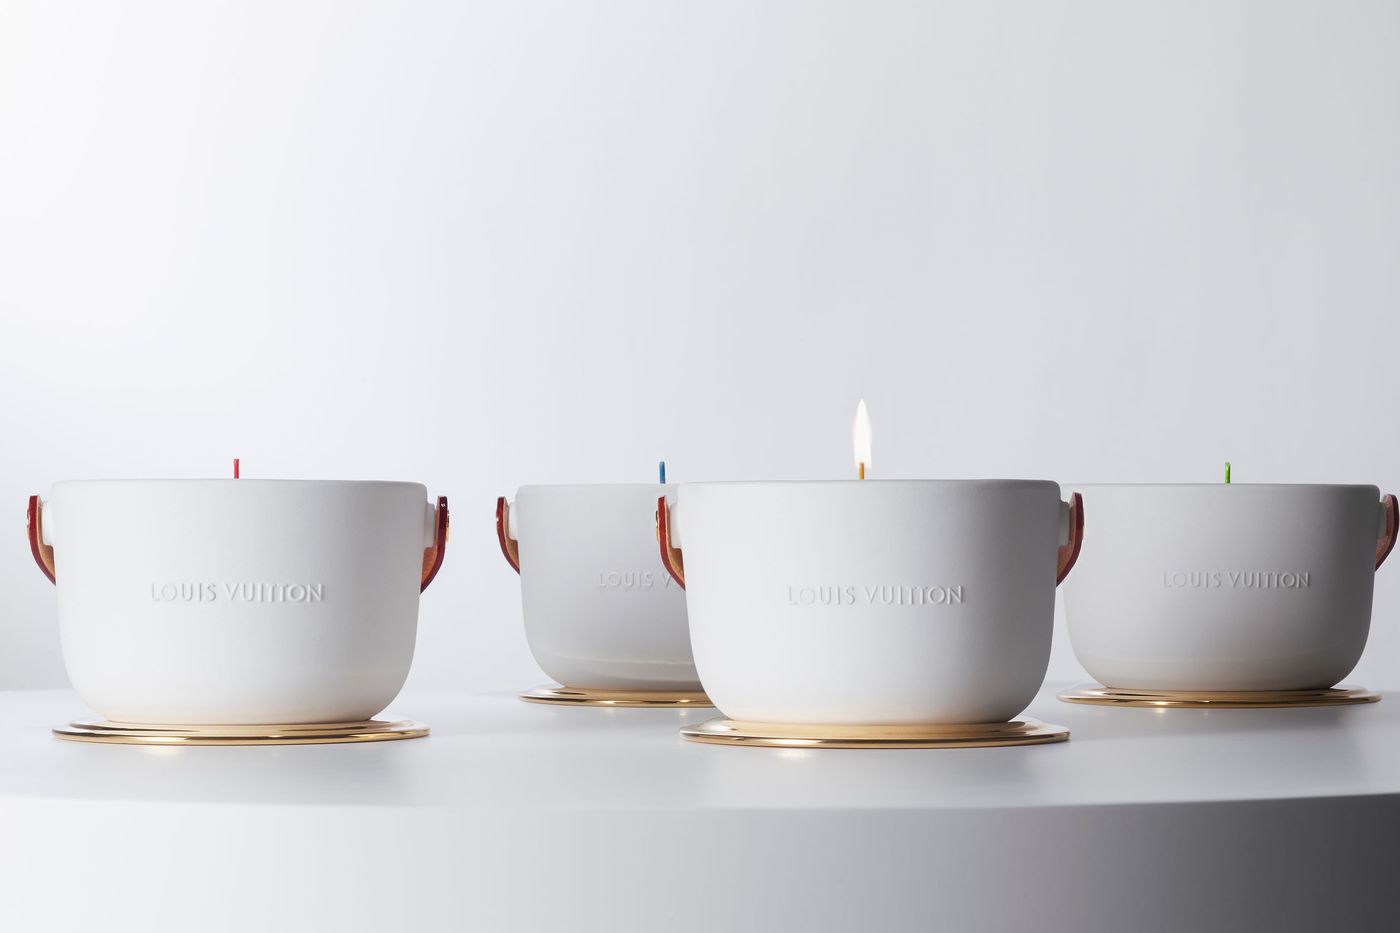 Louis Vuitton reveals how the process behind its luxurious French candles